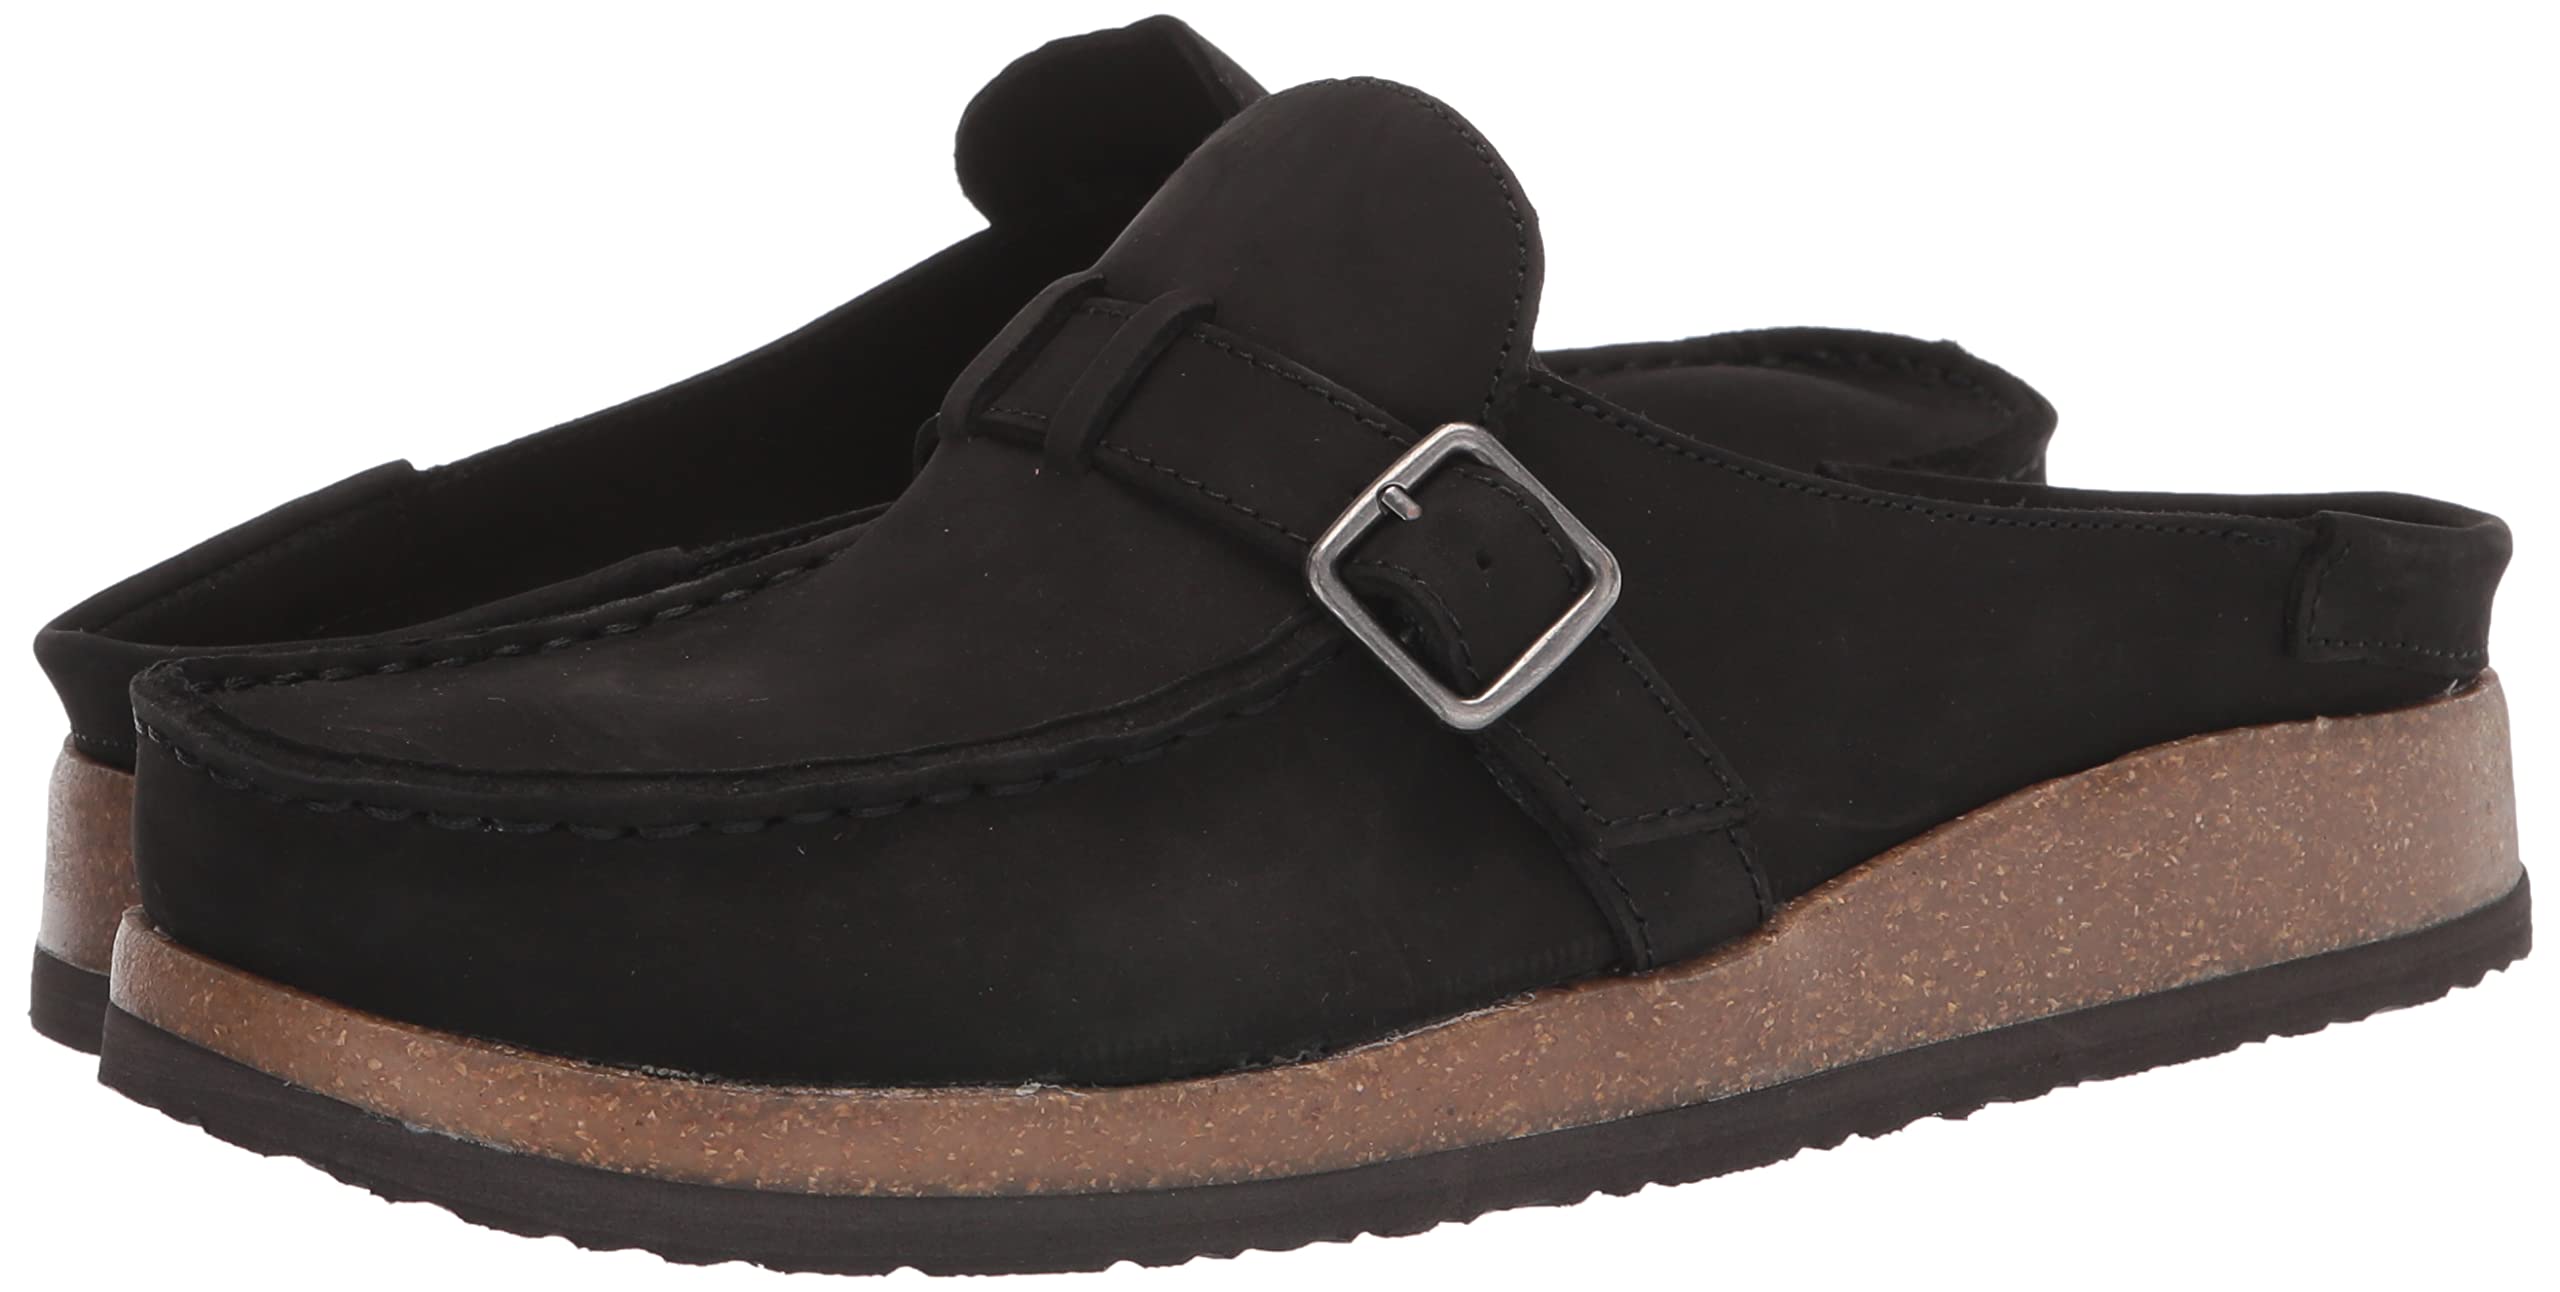 WHITE MOUNTAIN Shoes Bayhill Leather Footbeds Clog